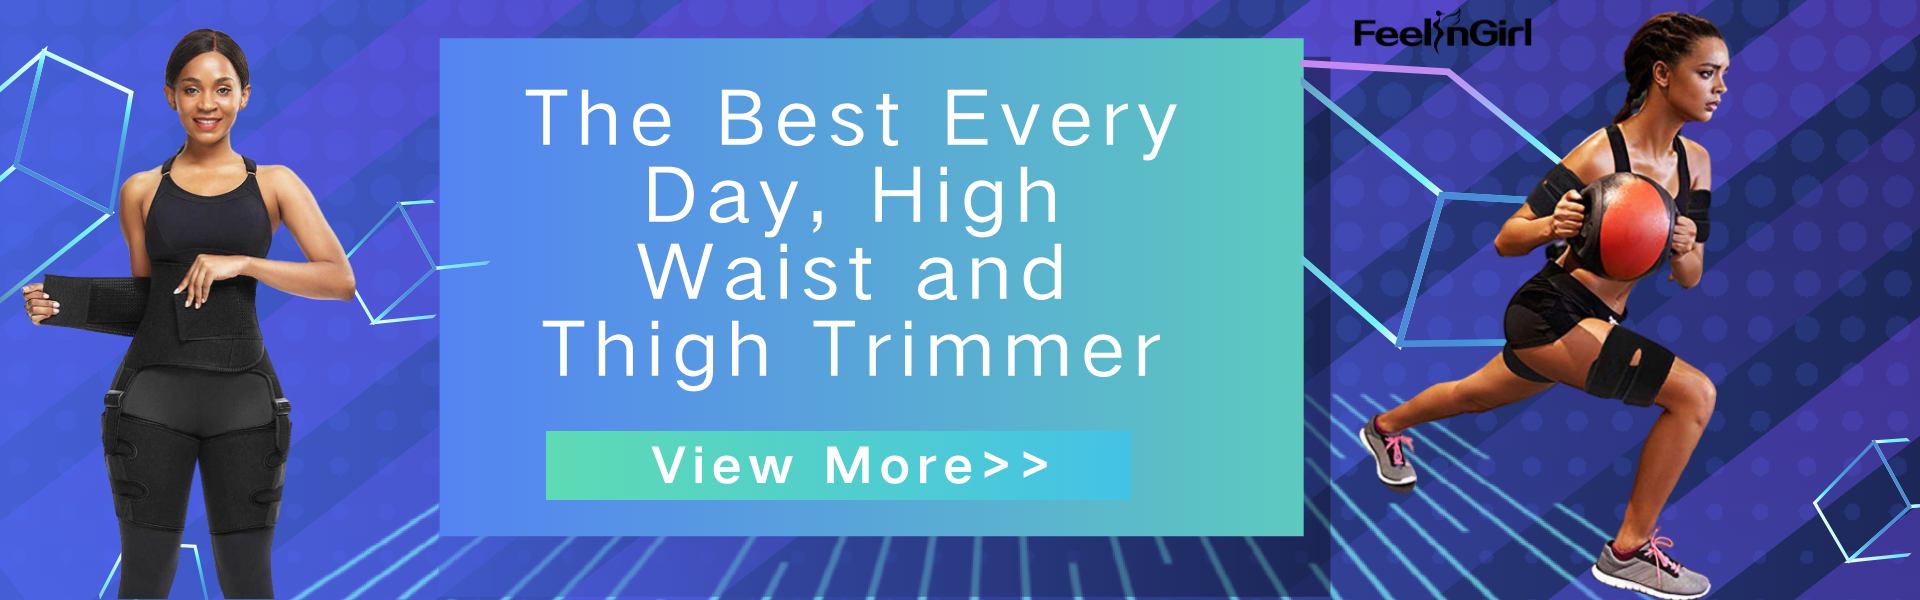 The Best Every Day, High Waist and Thigh Trimmer